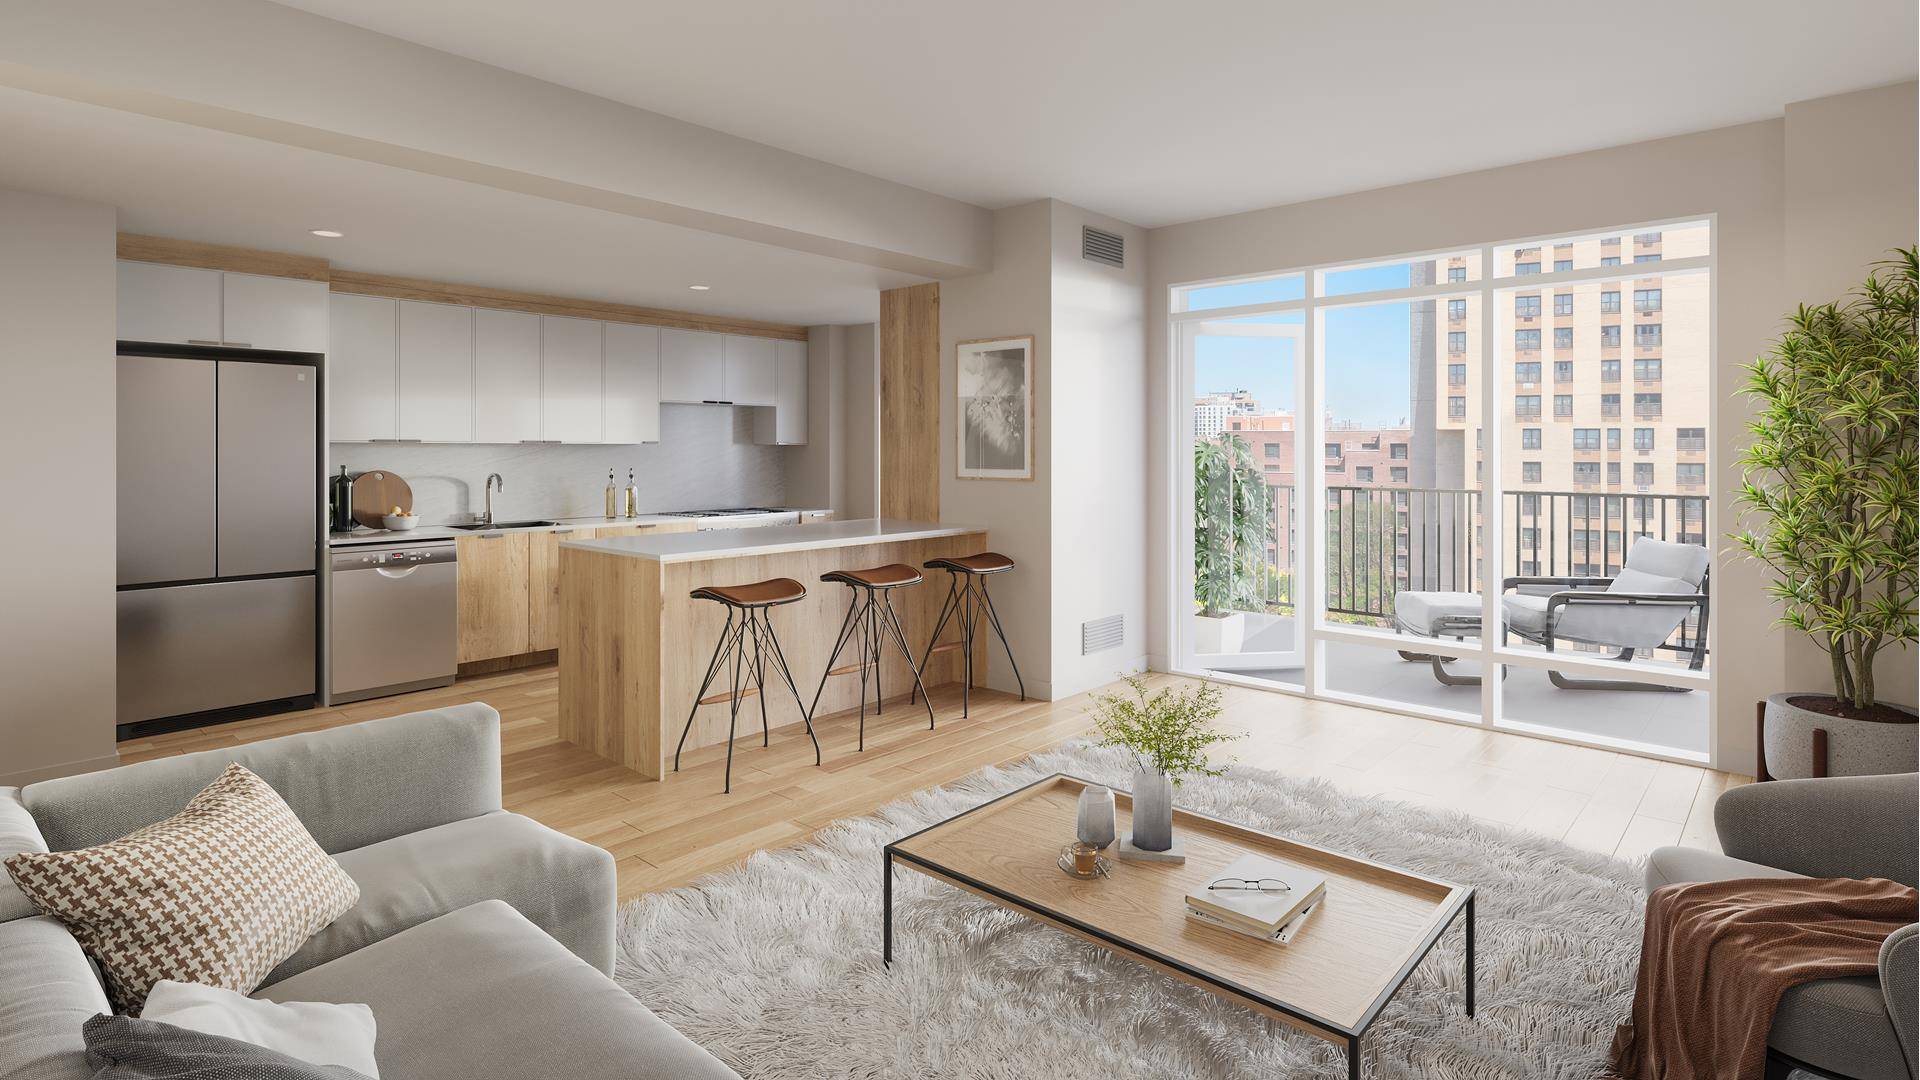 Immediate Occupancy ! Brand new North East facing 1 BdRm 1 bath condo residence with large balcony at the PATAGONIA just now completed in South Harlem !